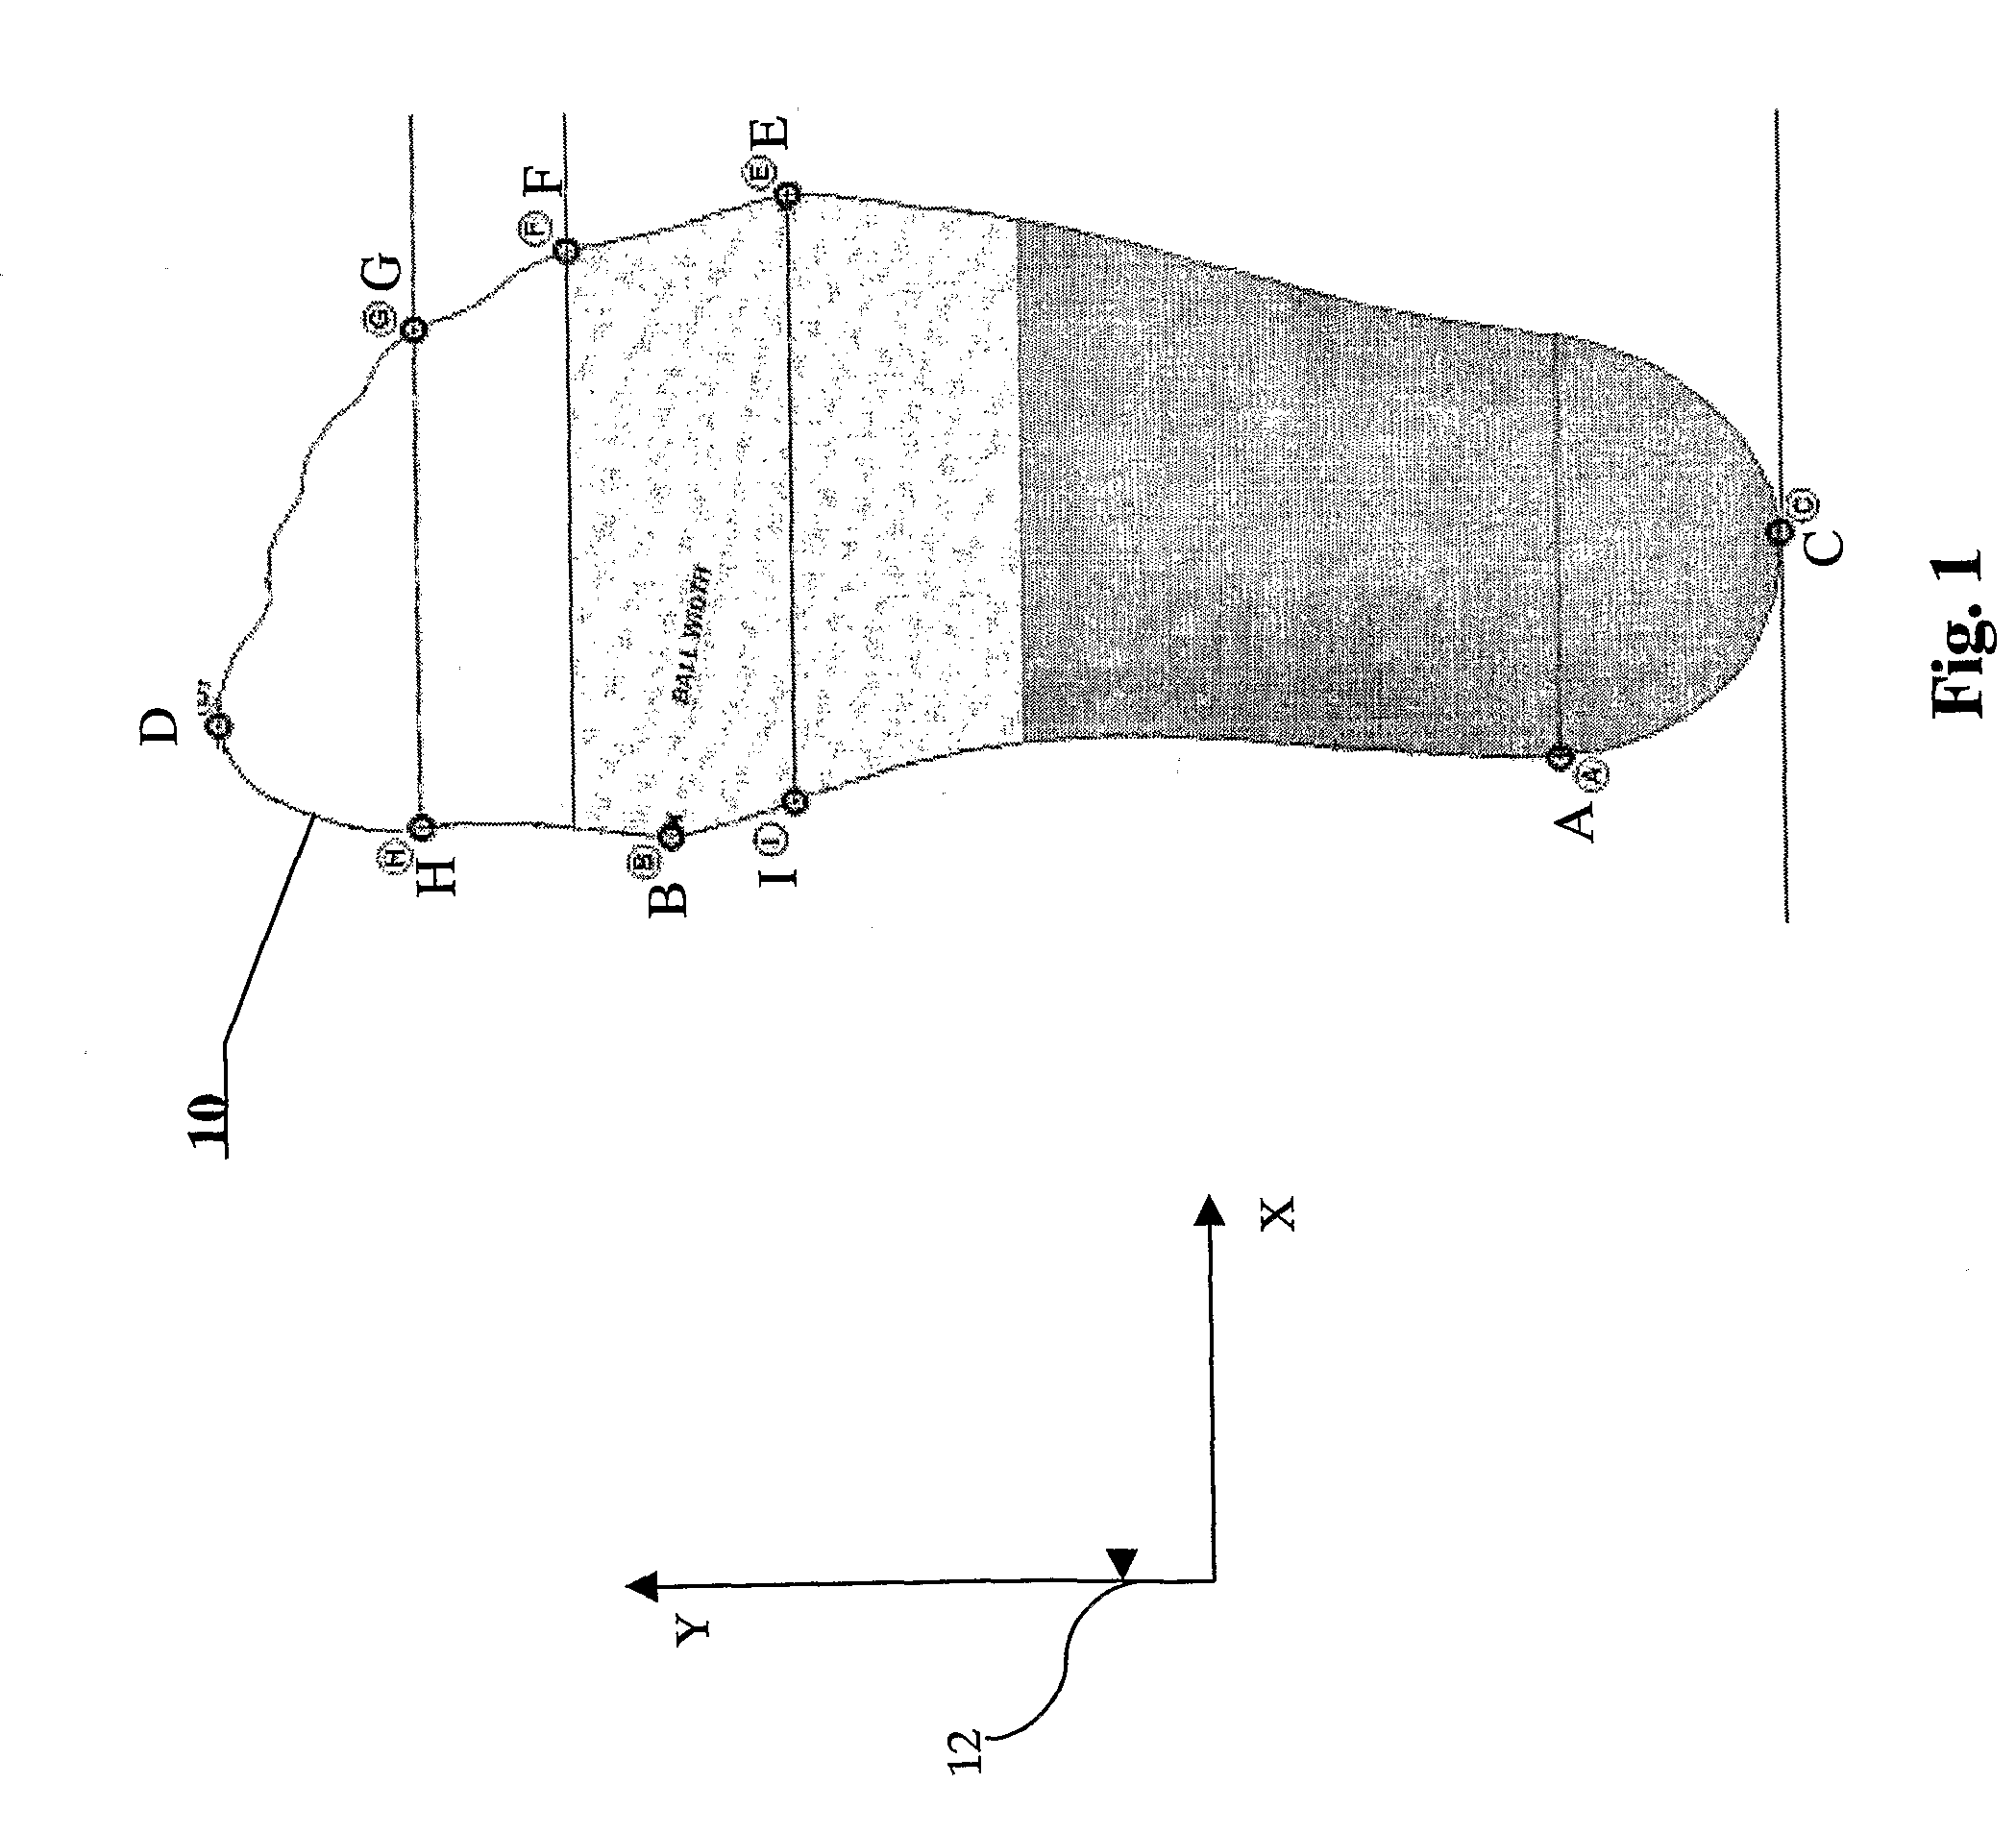 Method and system for customized shoe fitting based on common shoe last using foot outline comparison and interchangeable insole adaptors